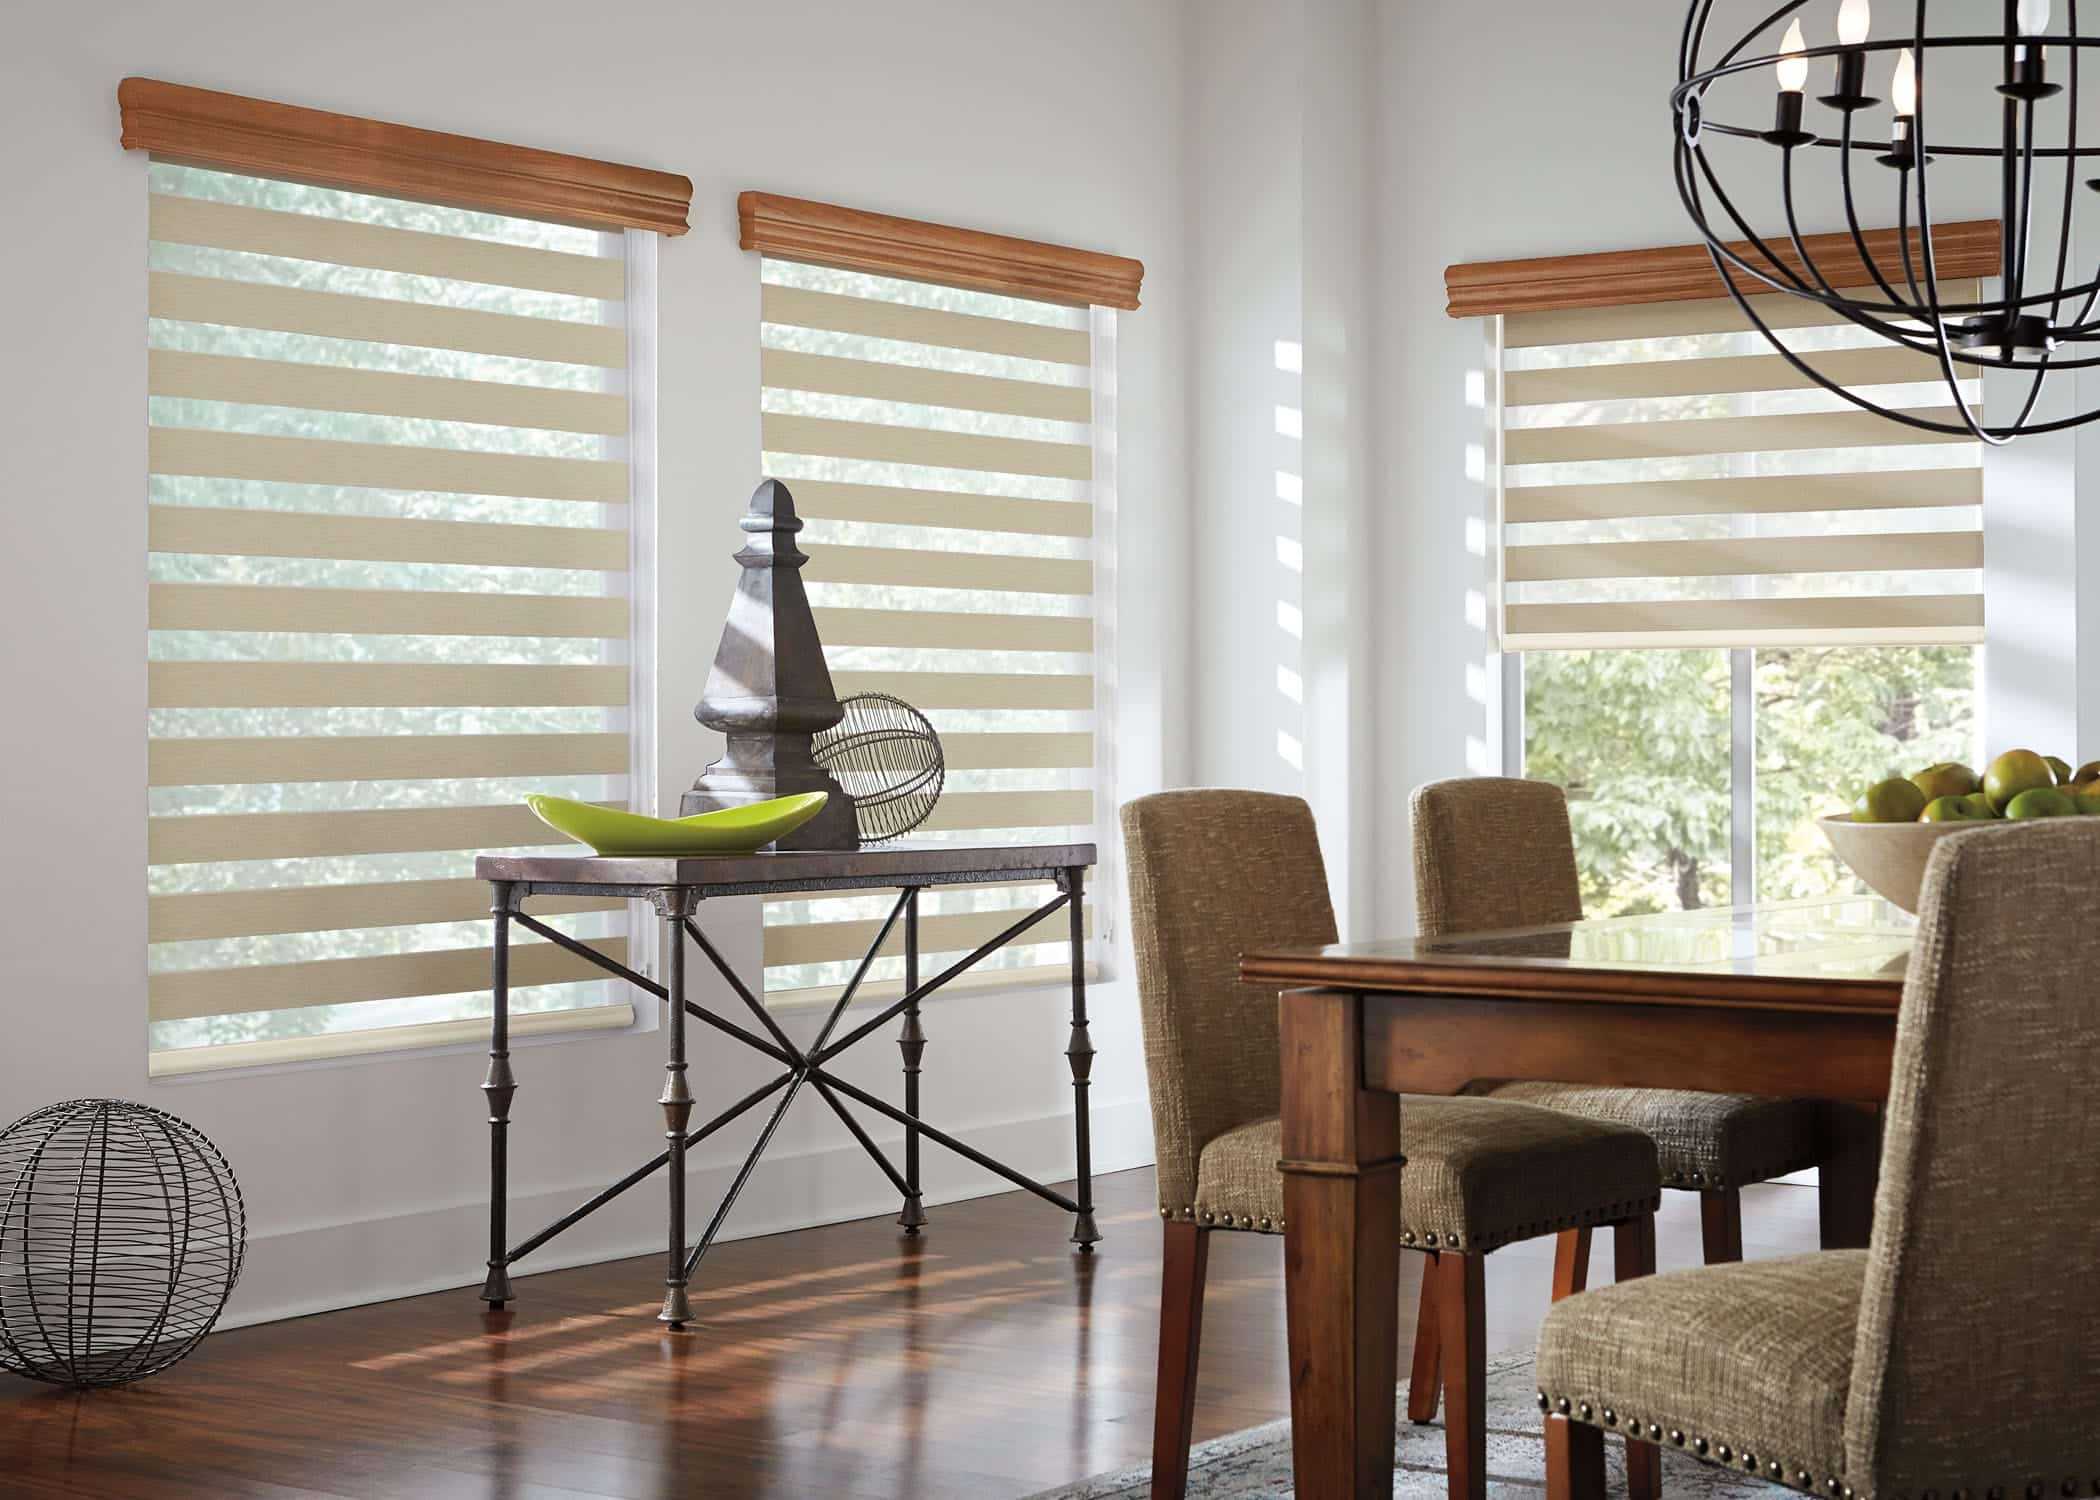 Zebra Blinds Dining Room - Allow lots of light to filter into your room. The sheer fabric is see-through, and the privacy fabric is translucent. Keep UV Out